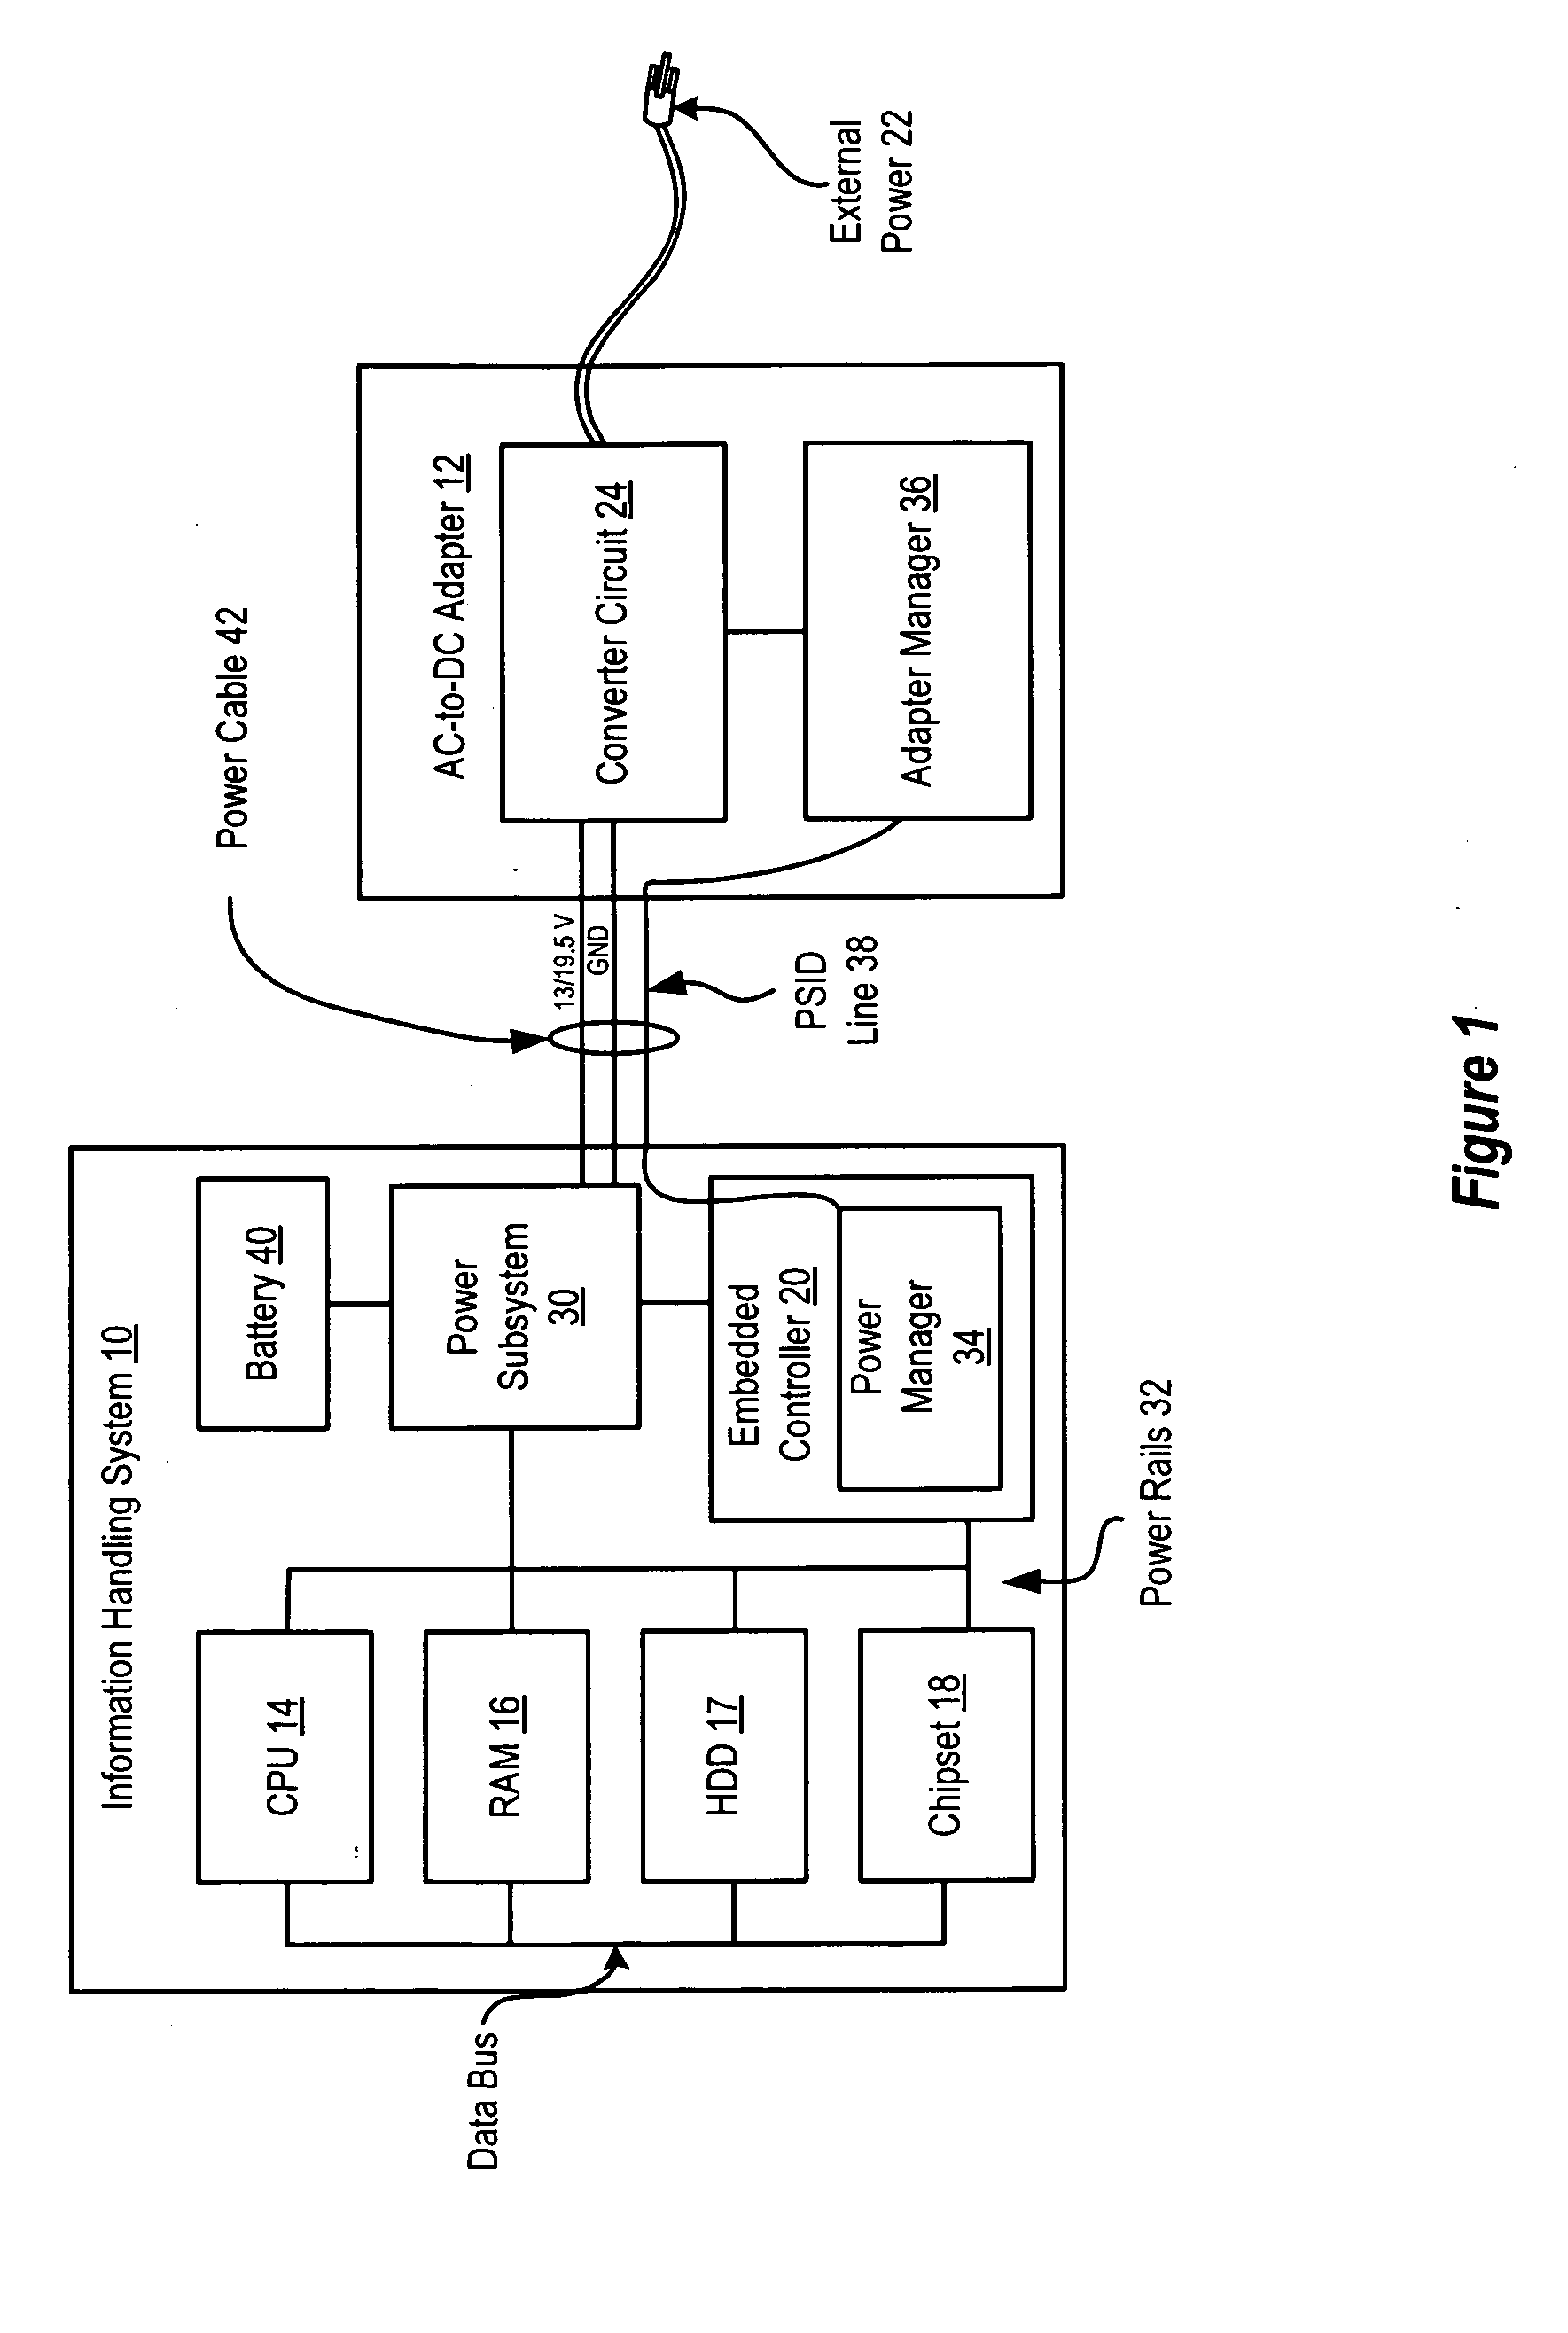 System and Method for Managing Power Consumption of an Information Handling System